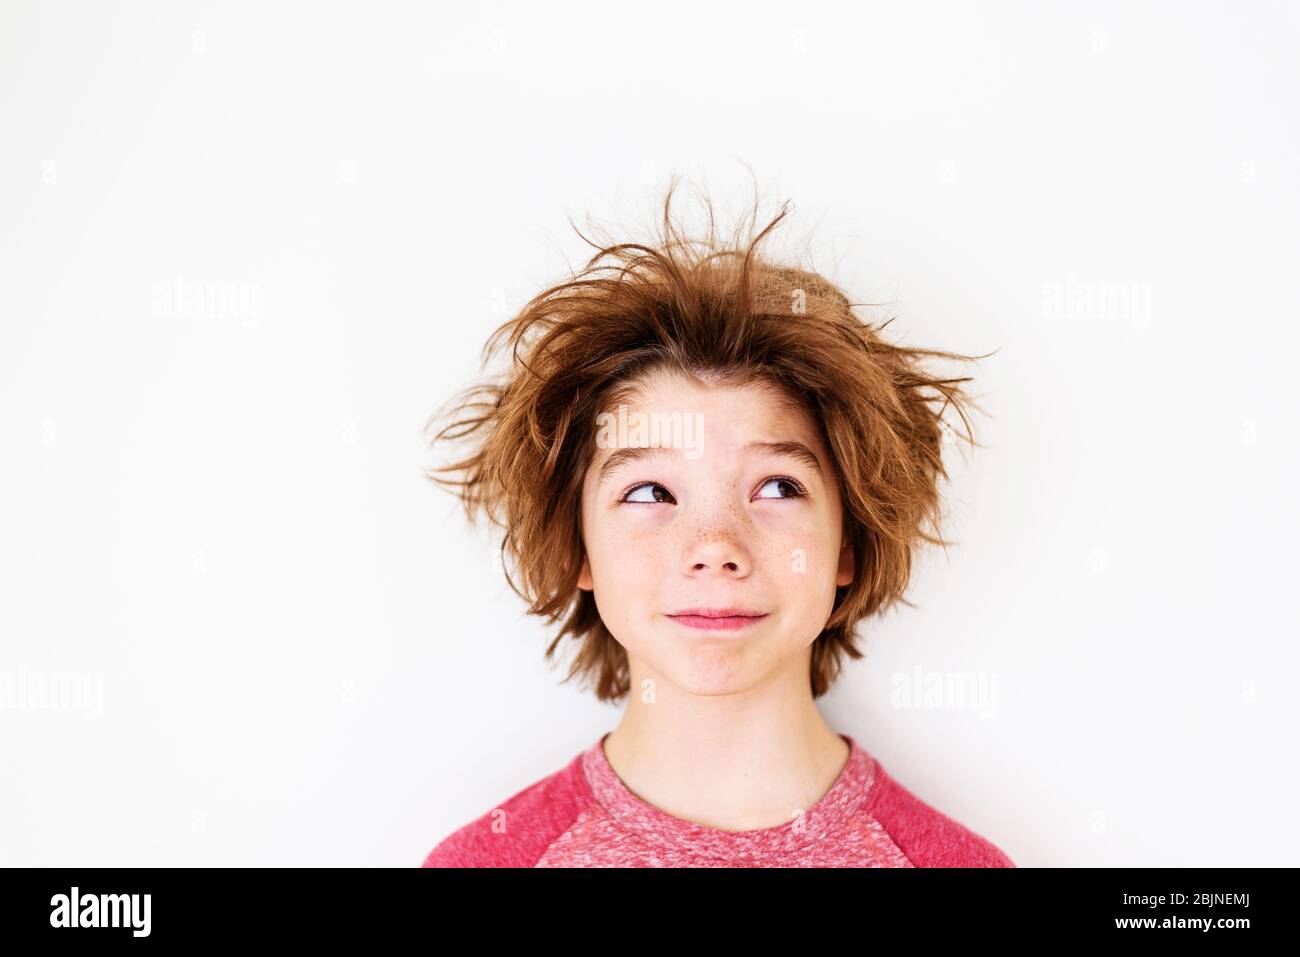 Portrait of a boy with messy hair Stock Photo